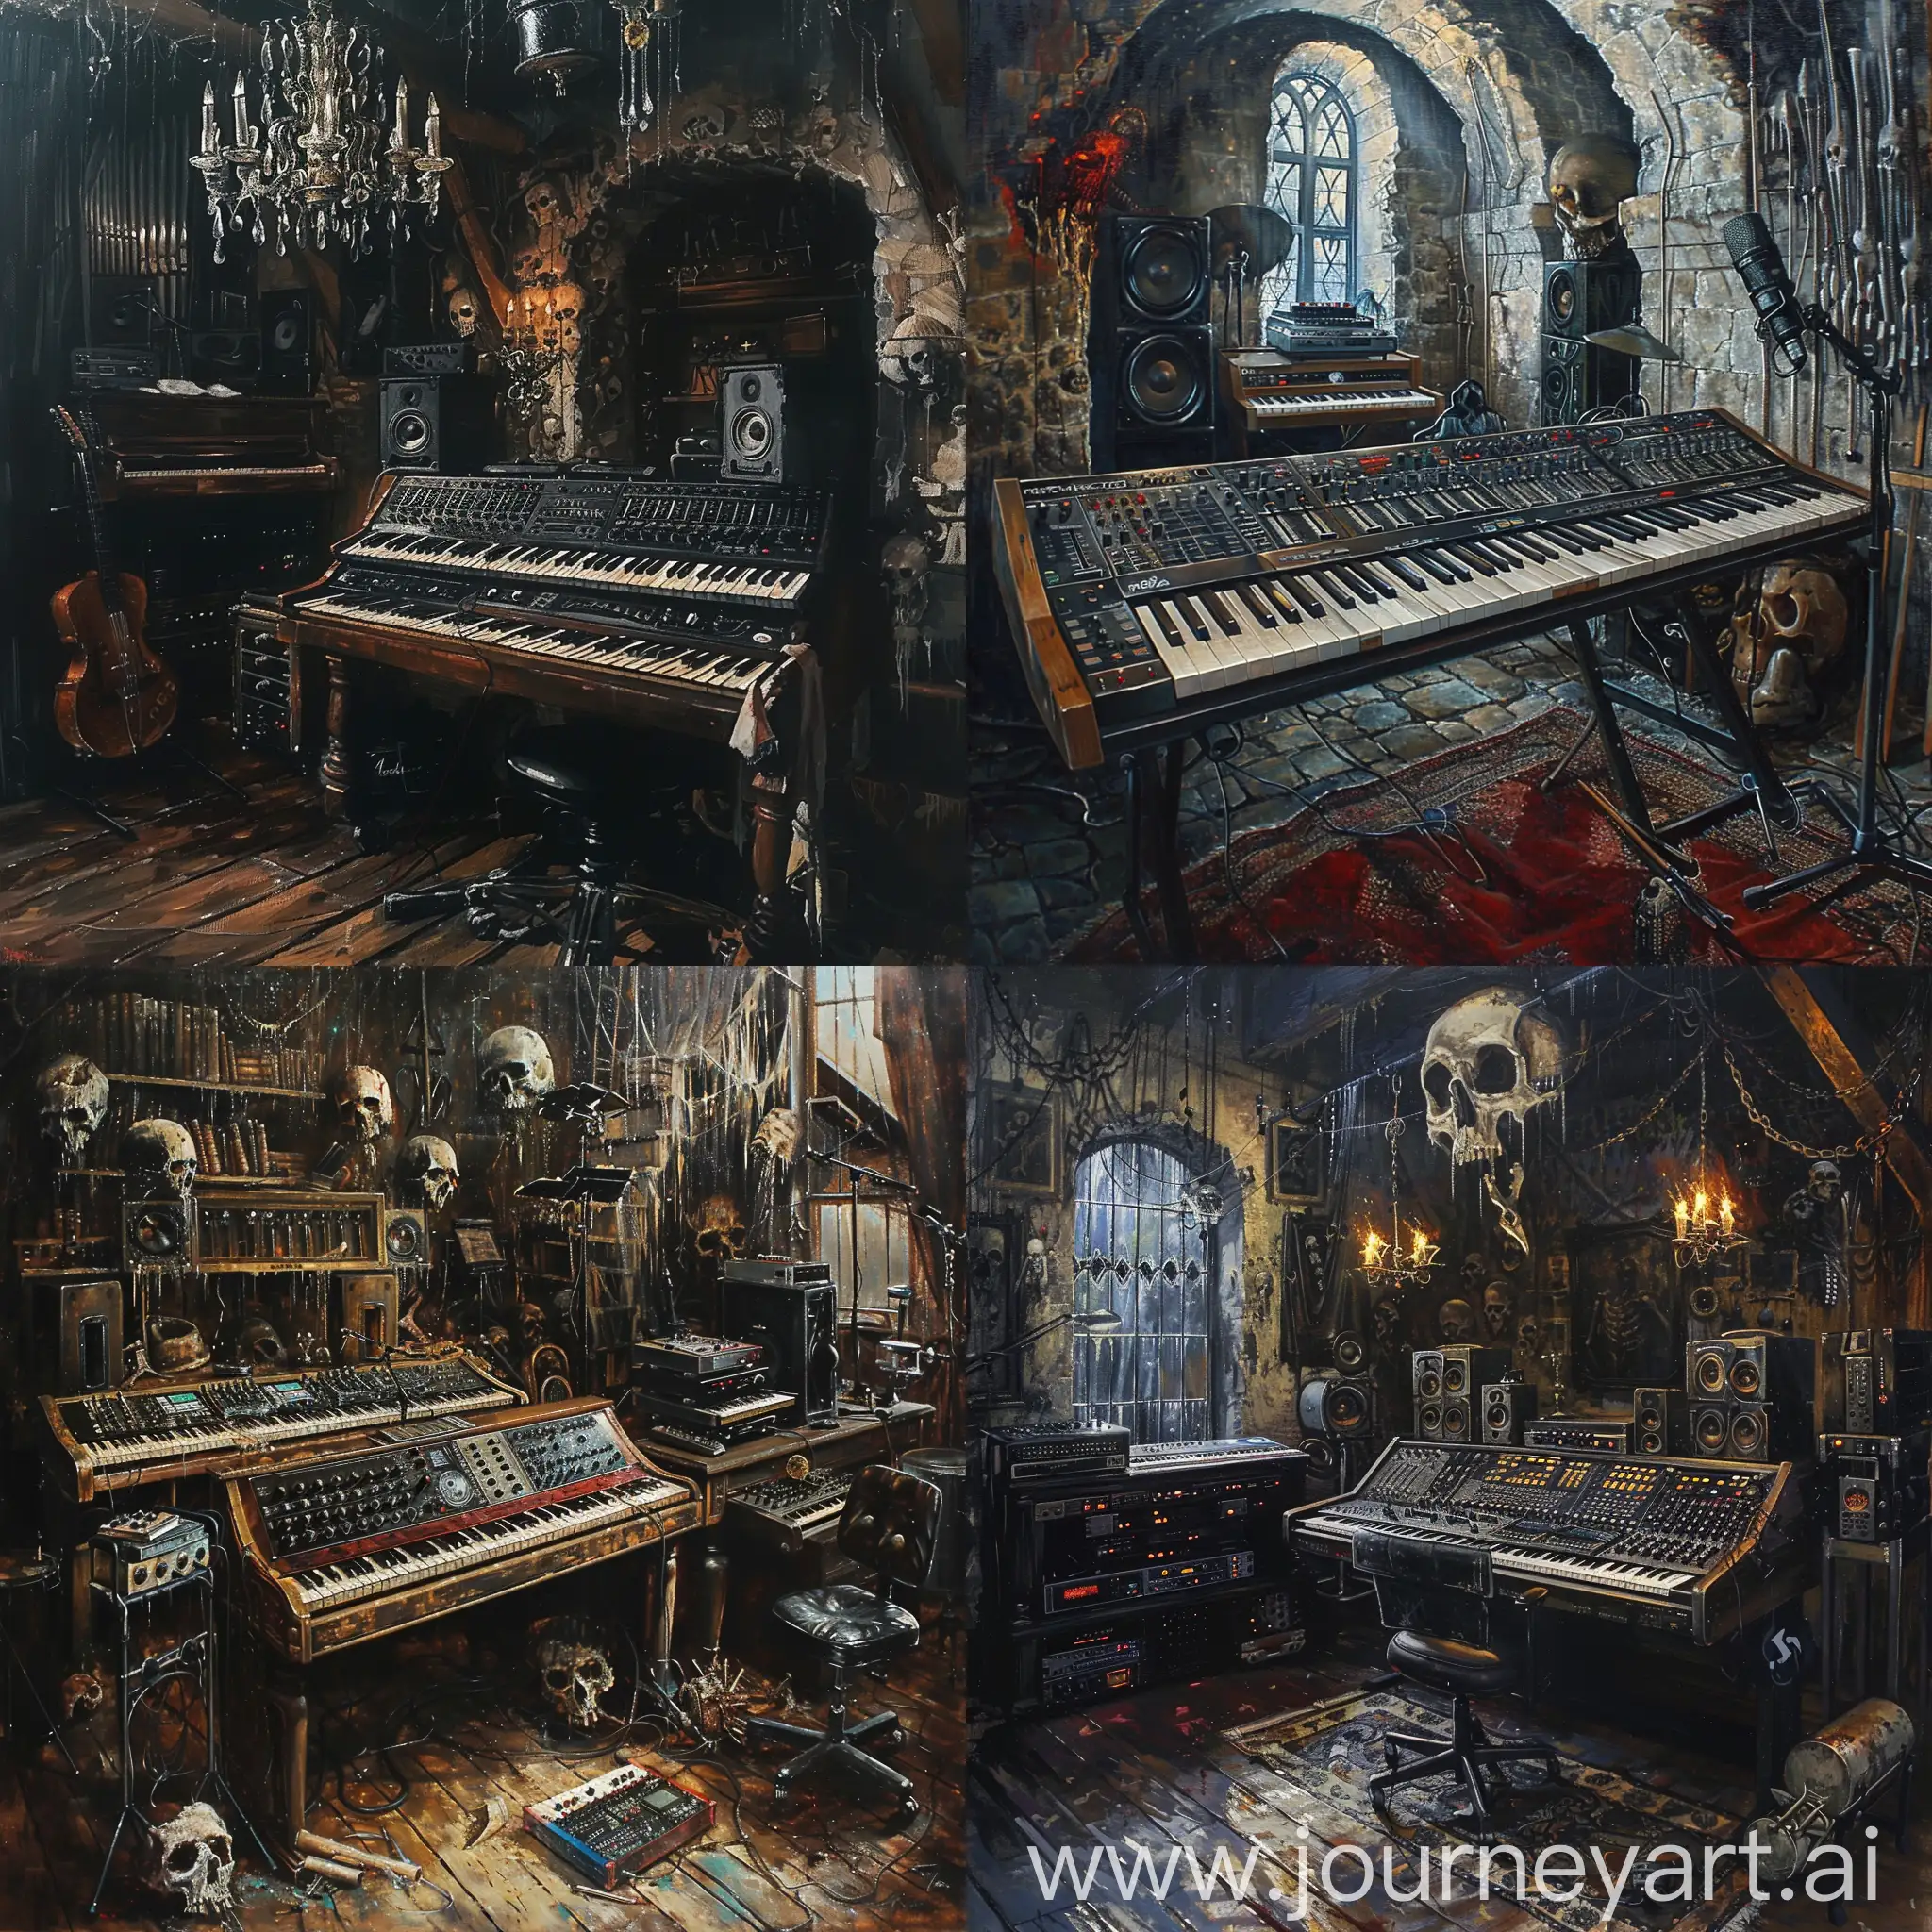 Heroes of might and magic 3 necropolis themed hyperrealistic oilpainting depicting a dark gothic macabre personal music studio